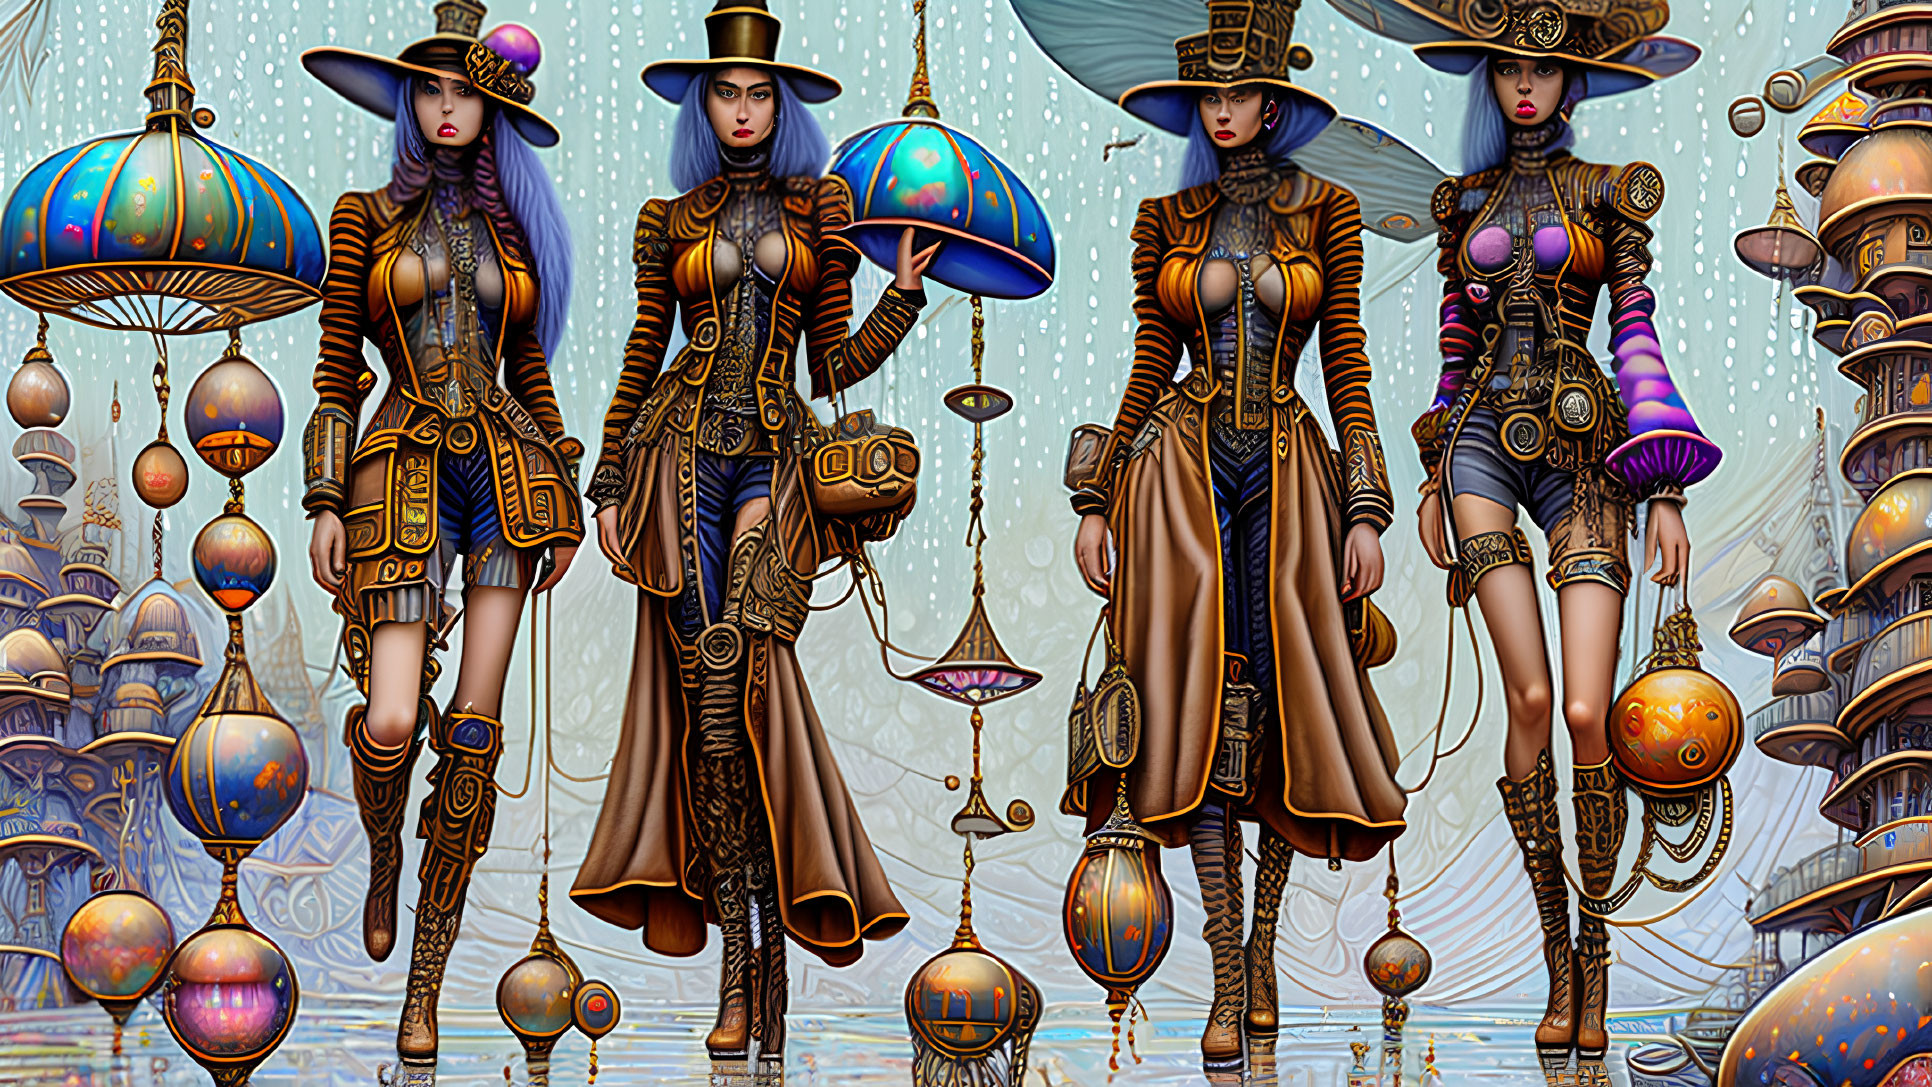 Futuristic steampunk female figures in elaborate attire with floating spheres.